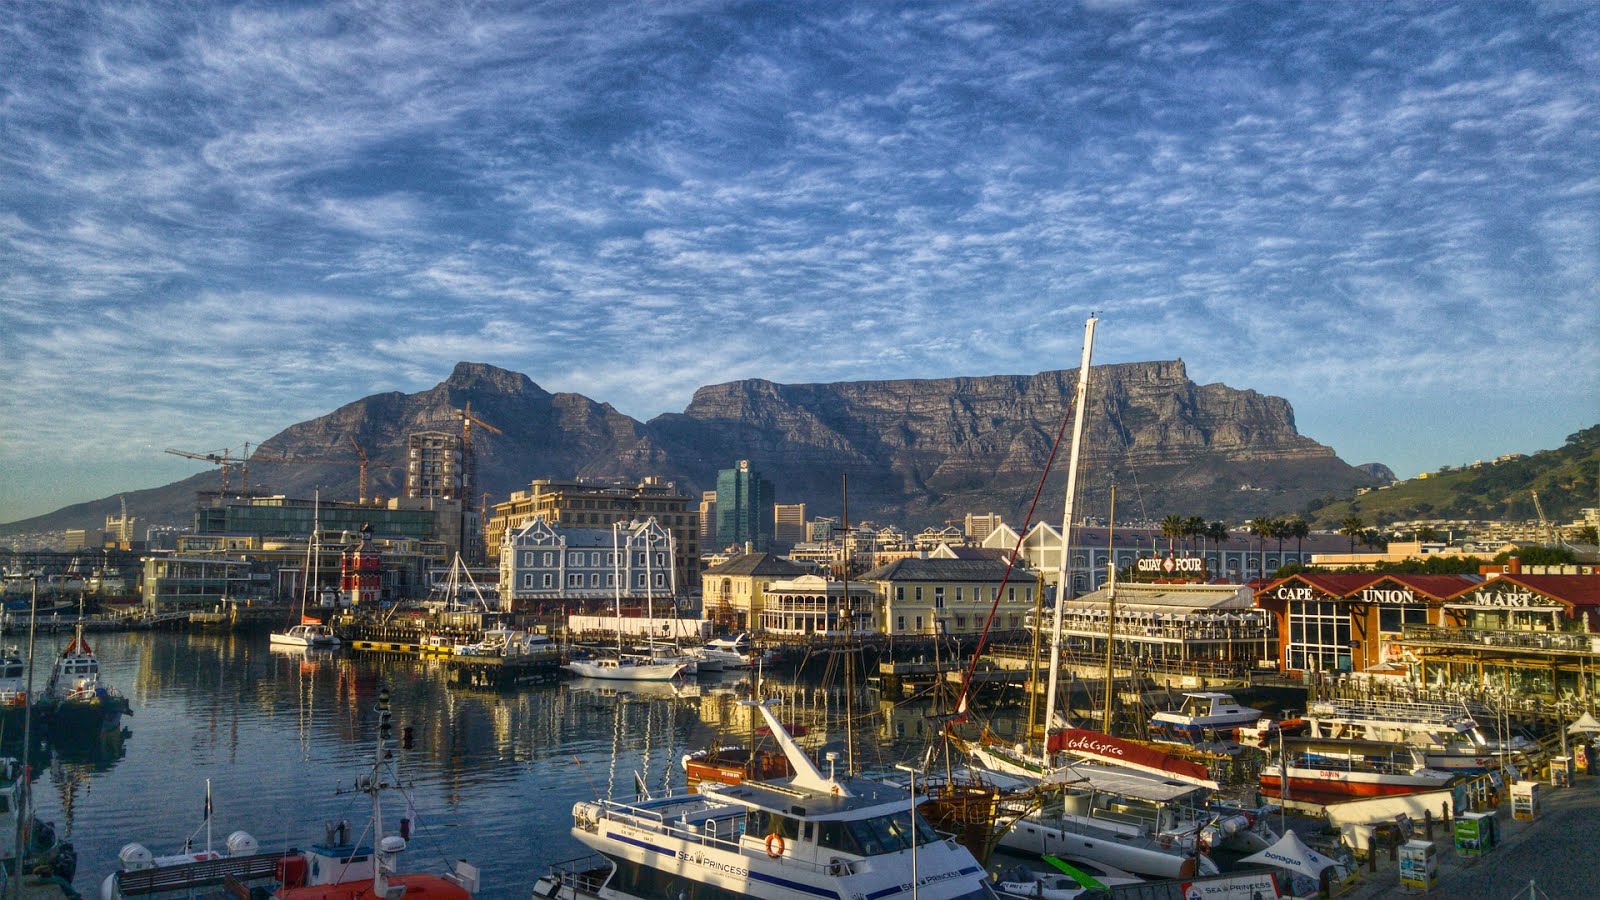 Luxury shopping at the V&A Waterfront - Cape Town photos - Cape Town photos  / South Africa